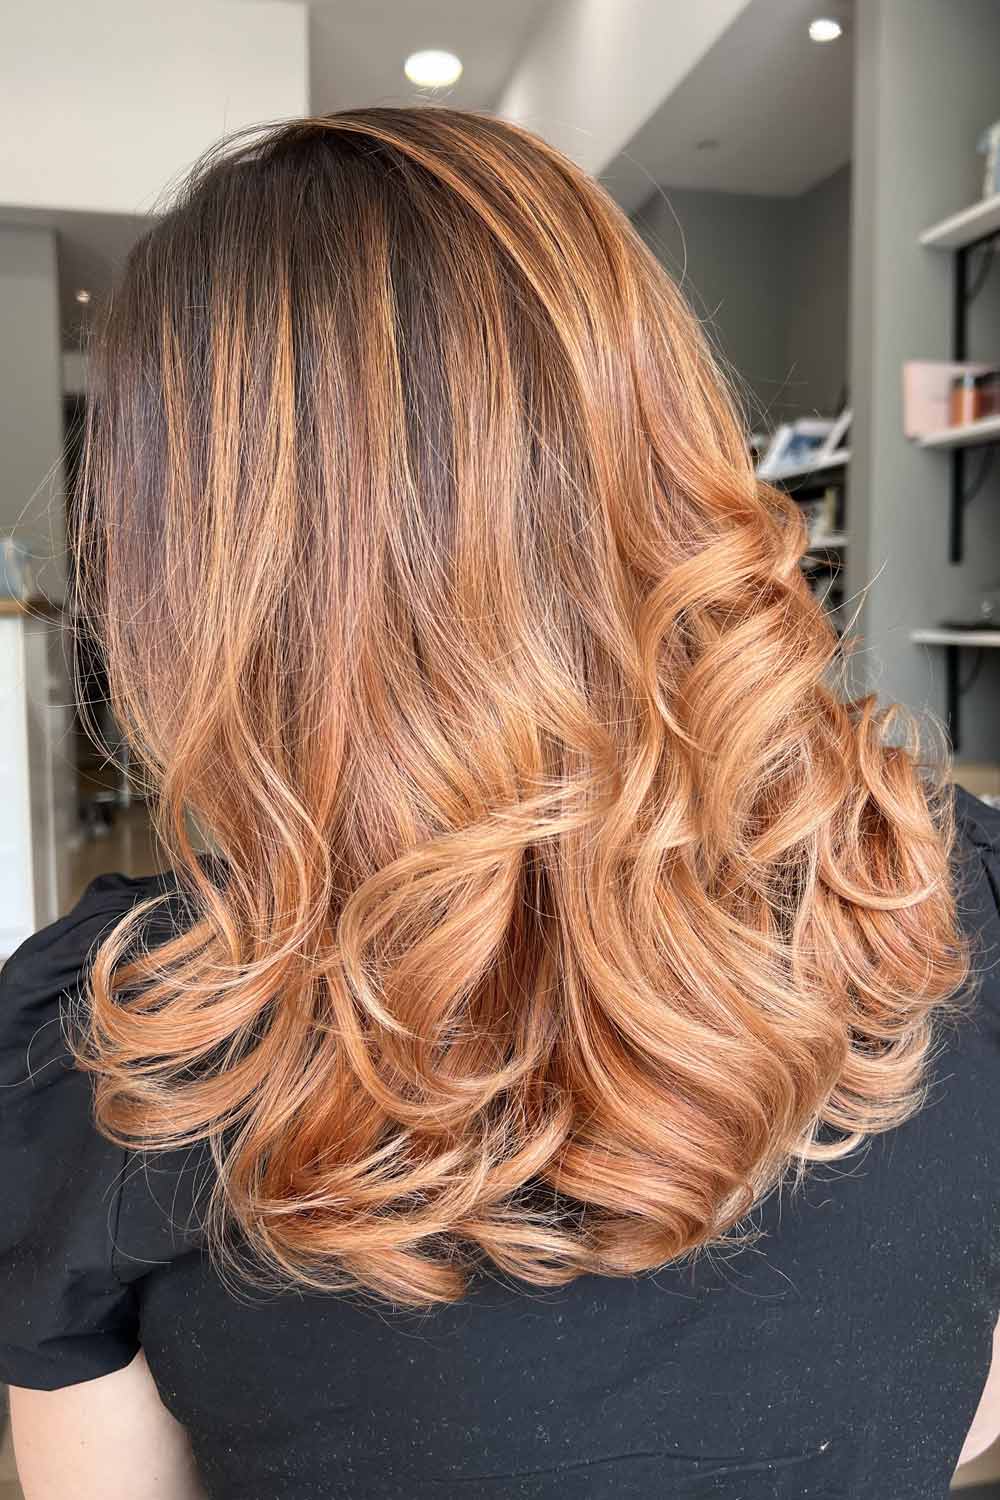 Ombre hair is another popular hair coloring technique that involves a gradual transition of color